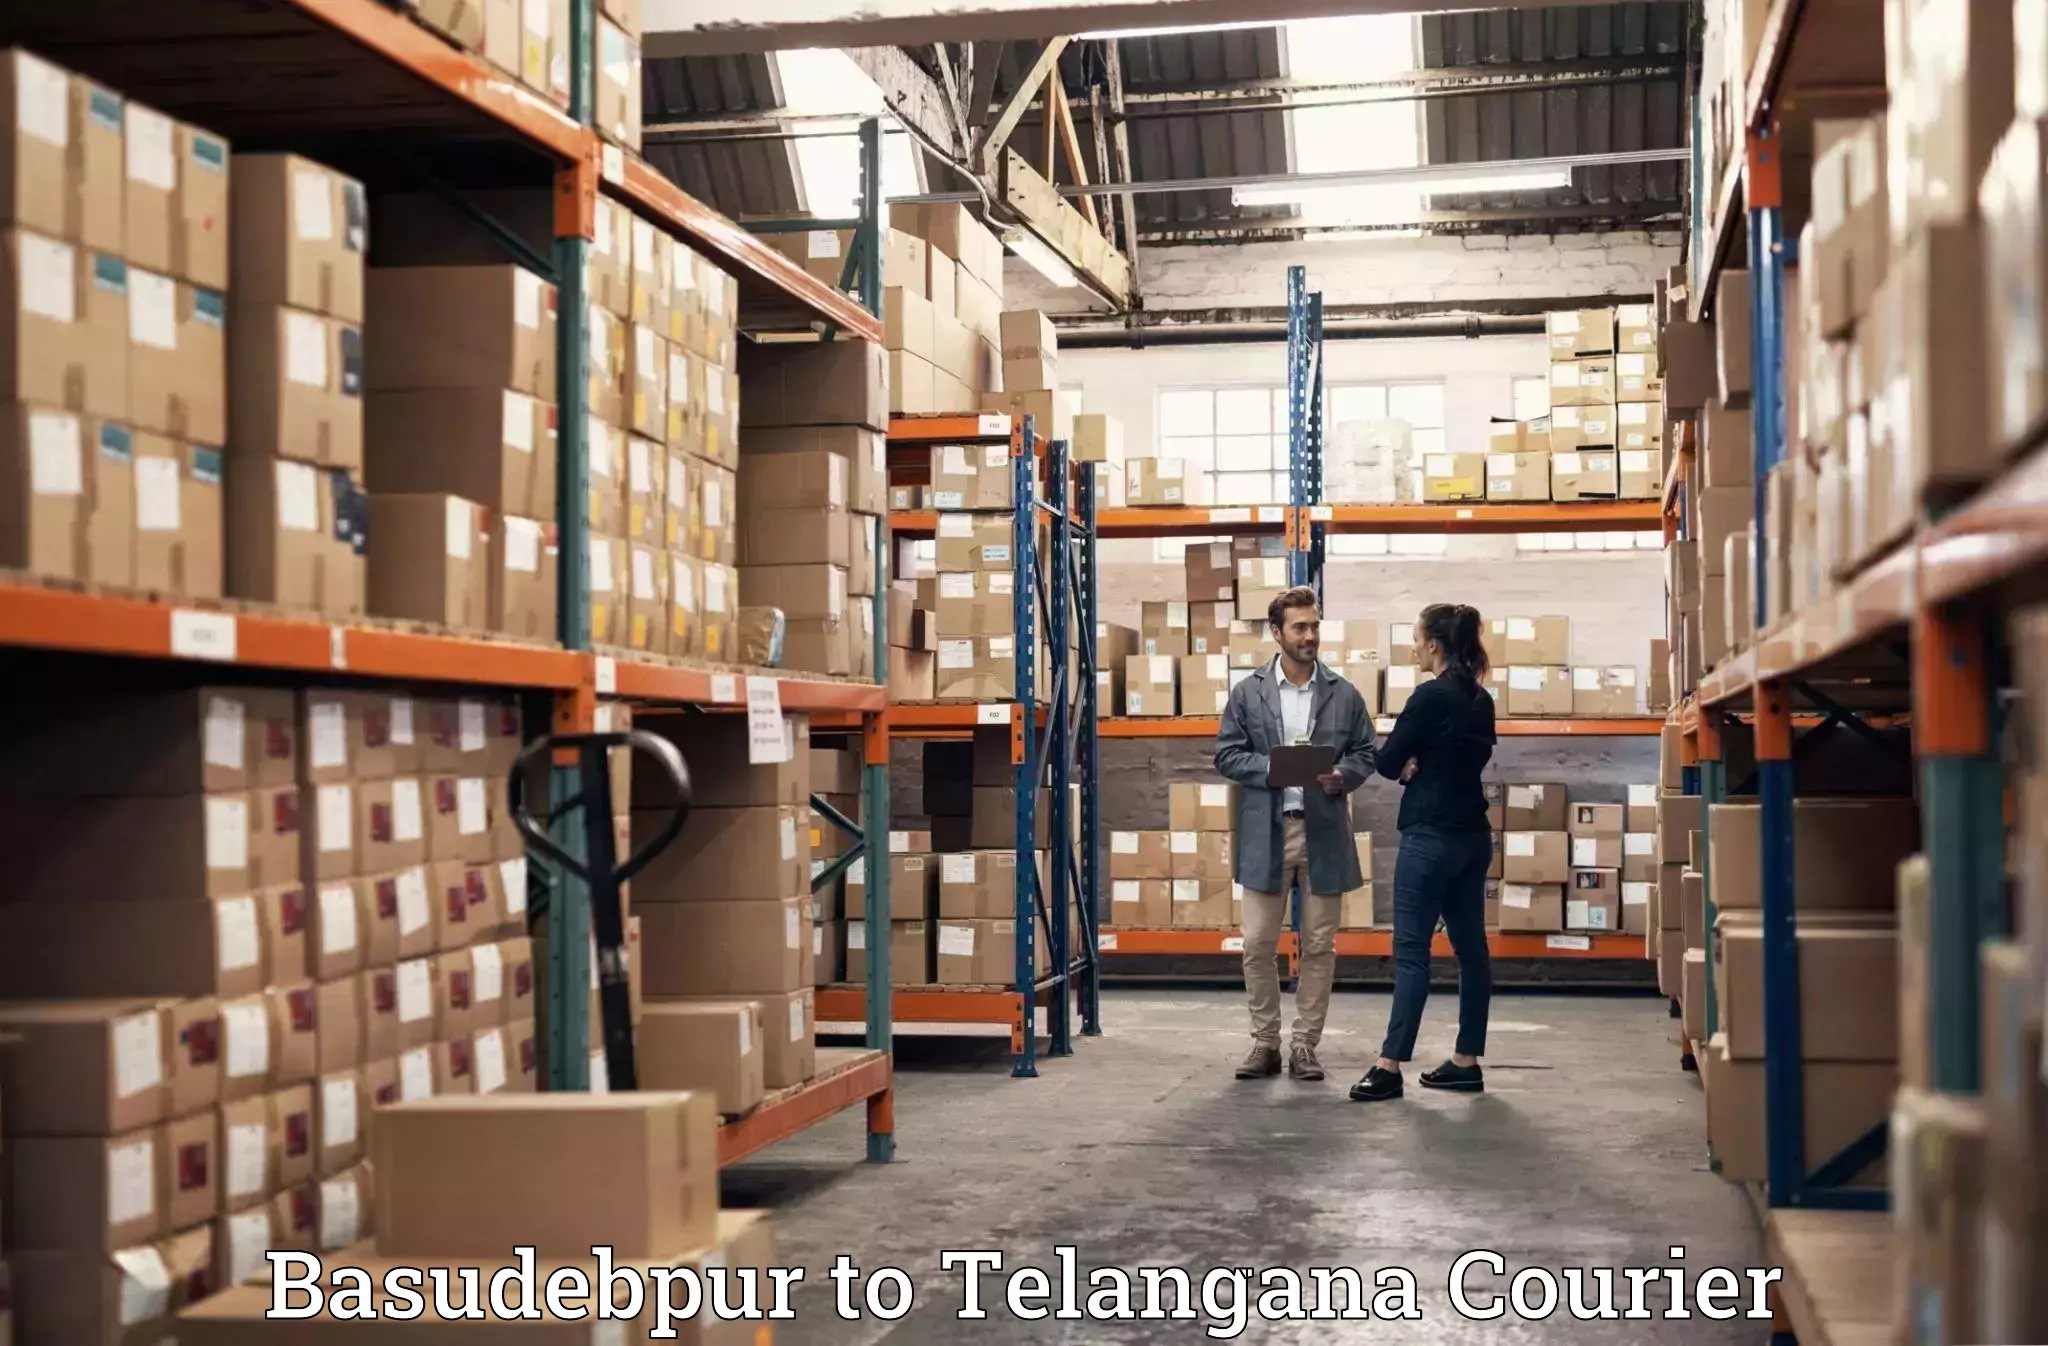 Quality relocation services Basudebpur to Netrang